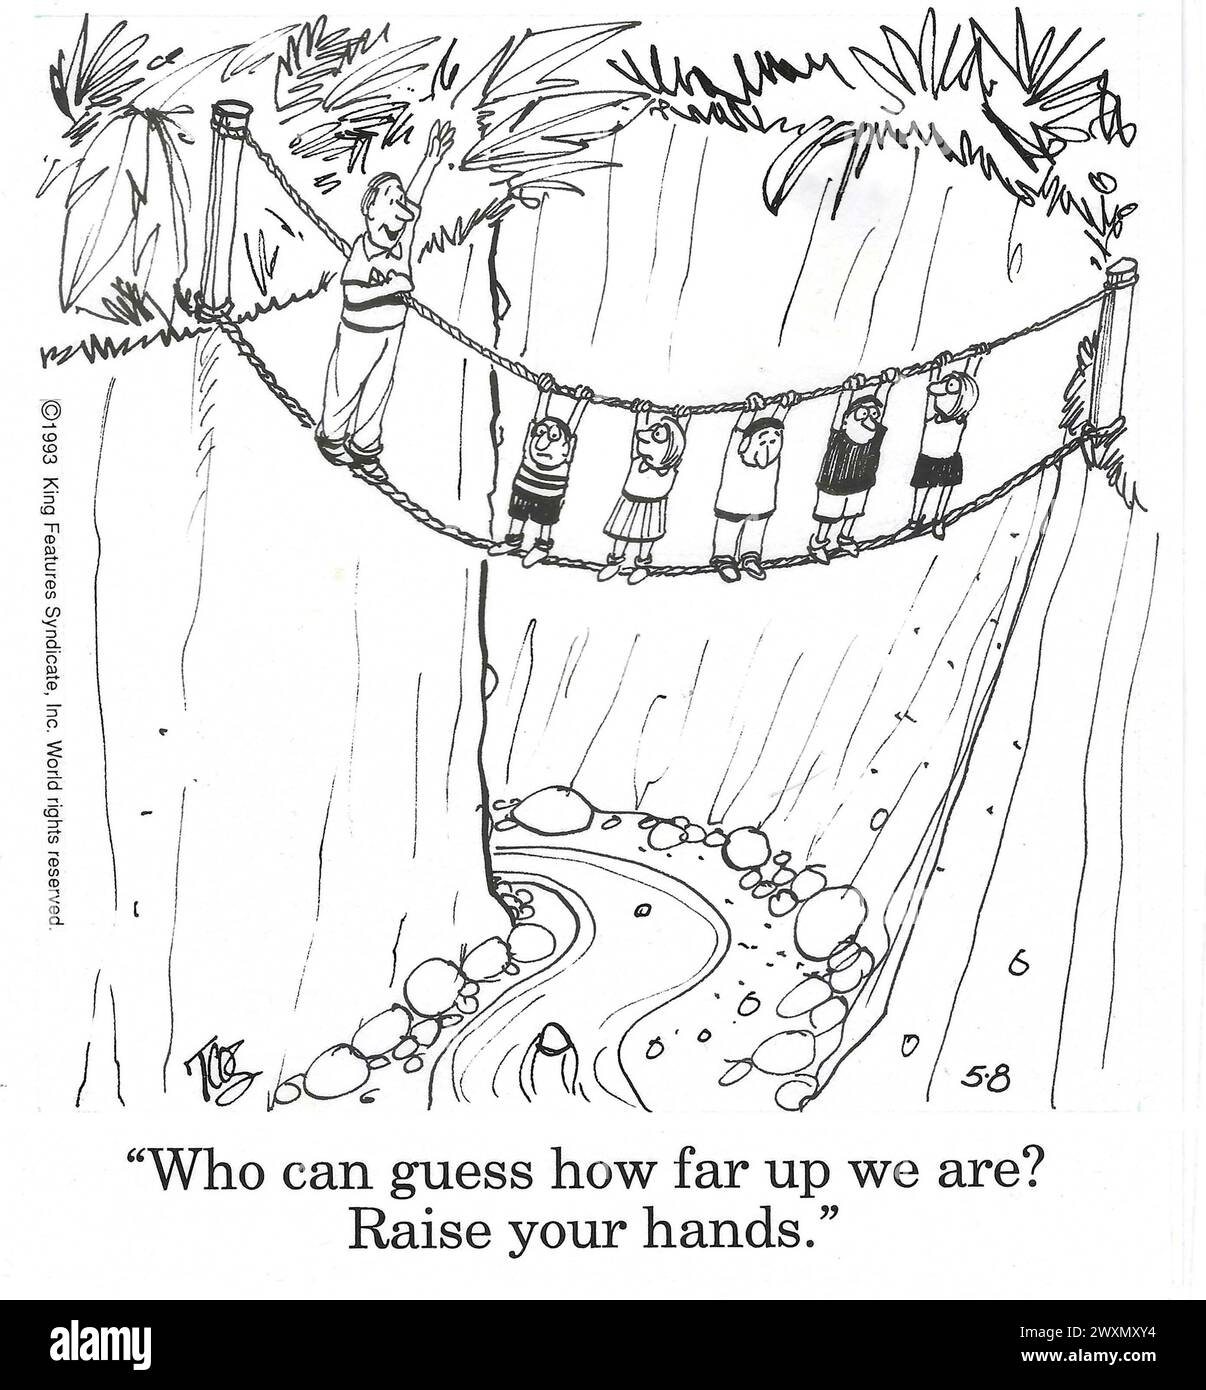 BW cartoon of kids on a rope swing and a teacher asking raise your hands if you know how high up we are. Stock Photo